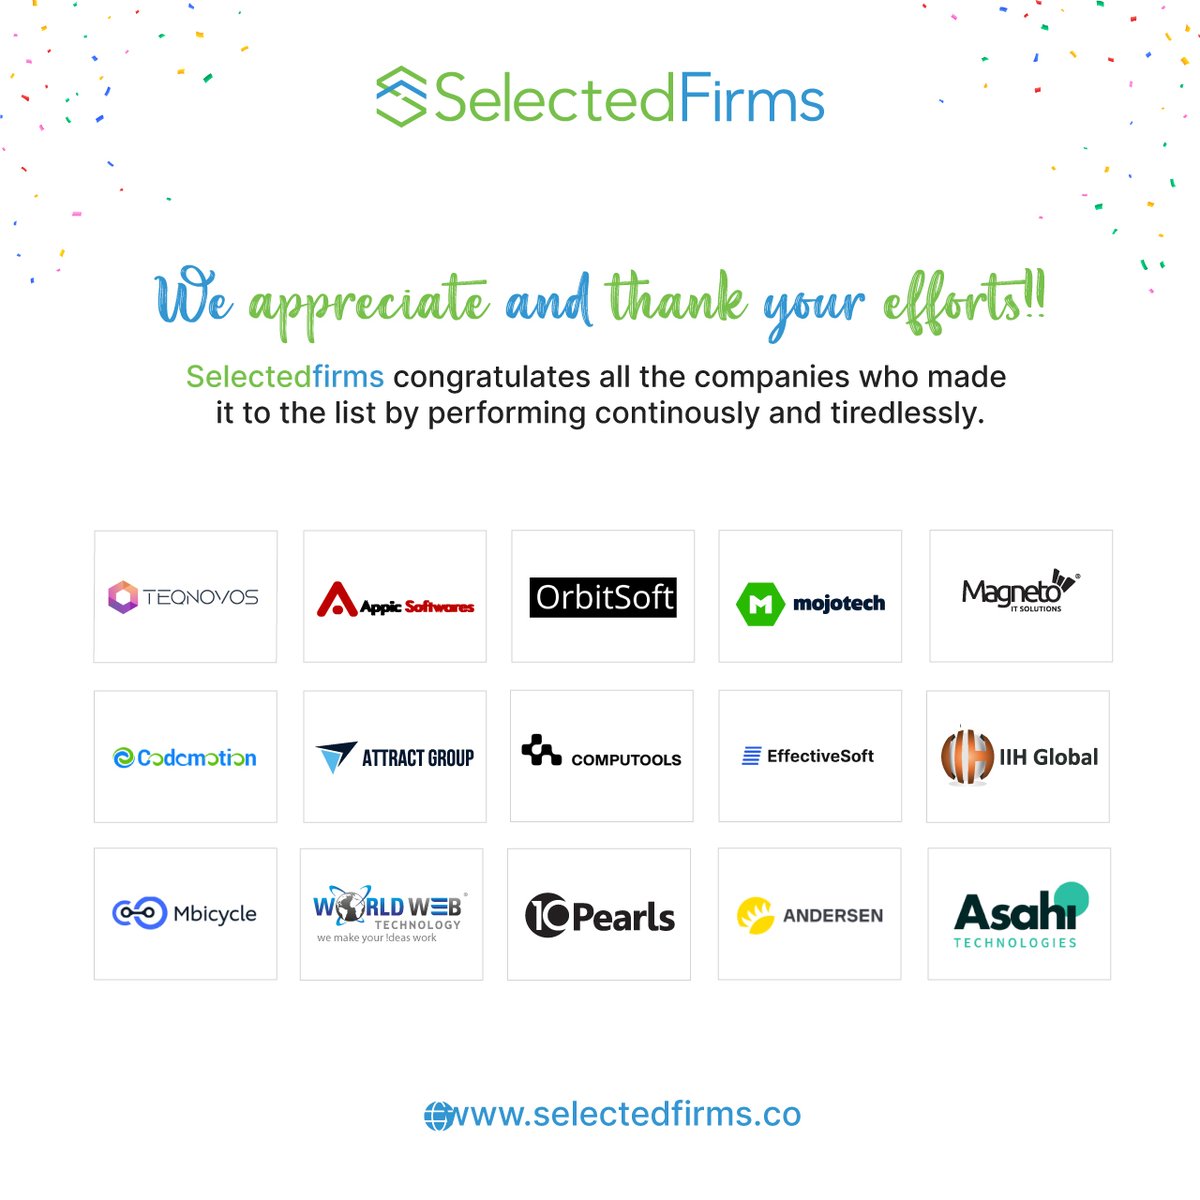 Thanks @FirmsSelected  for your appreciation. 😃

We are quite happy and confident about receiving this further distinction from Selected Companies.

#appicsoftwares #selectedfirms #topitservices #company